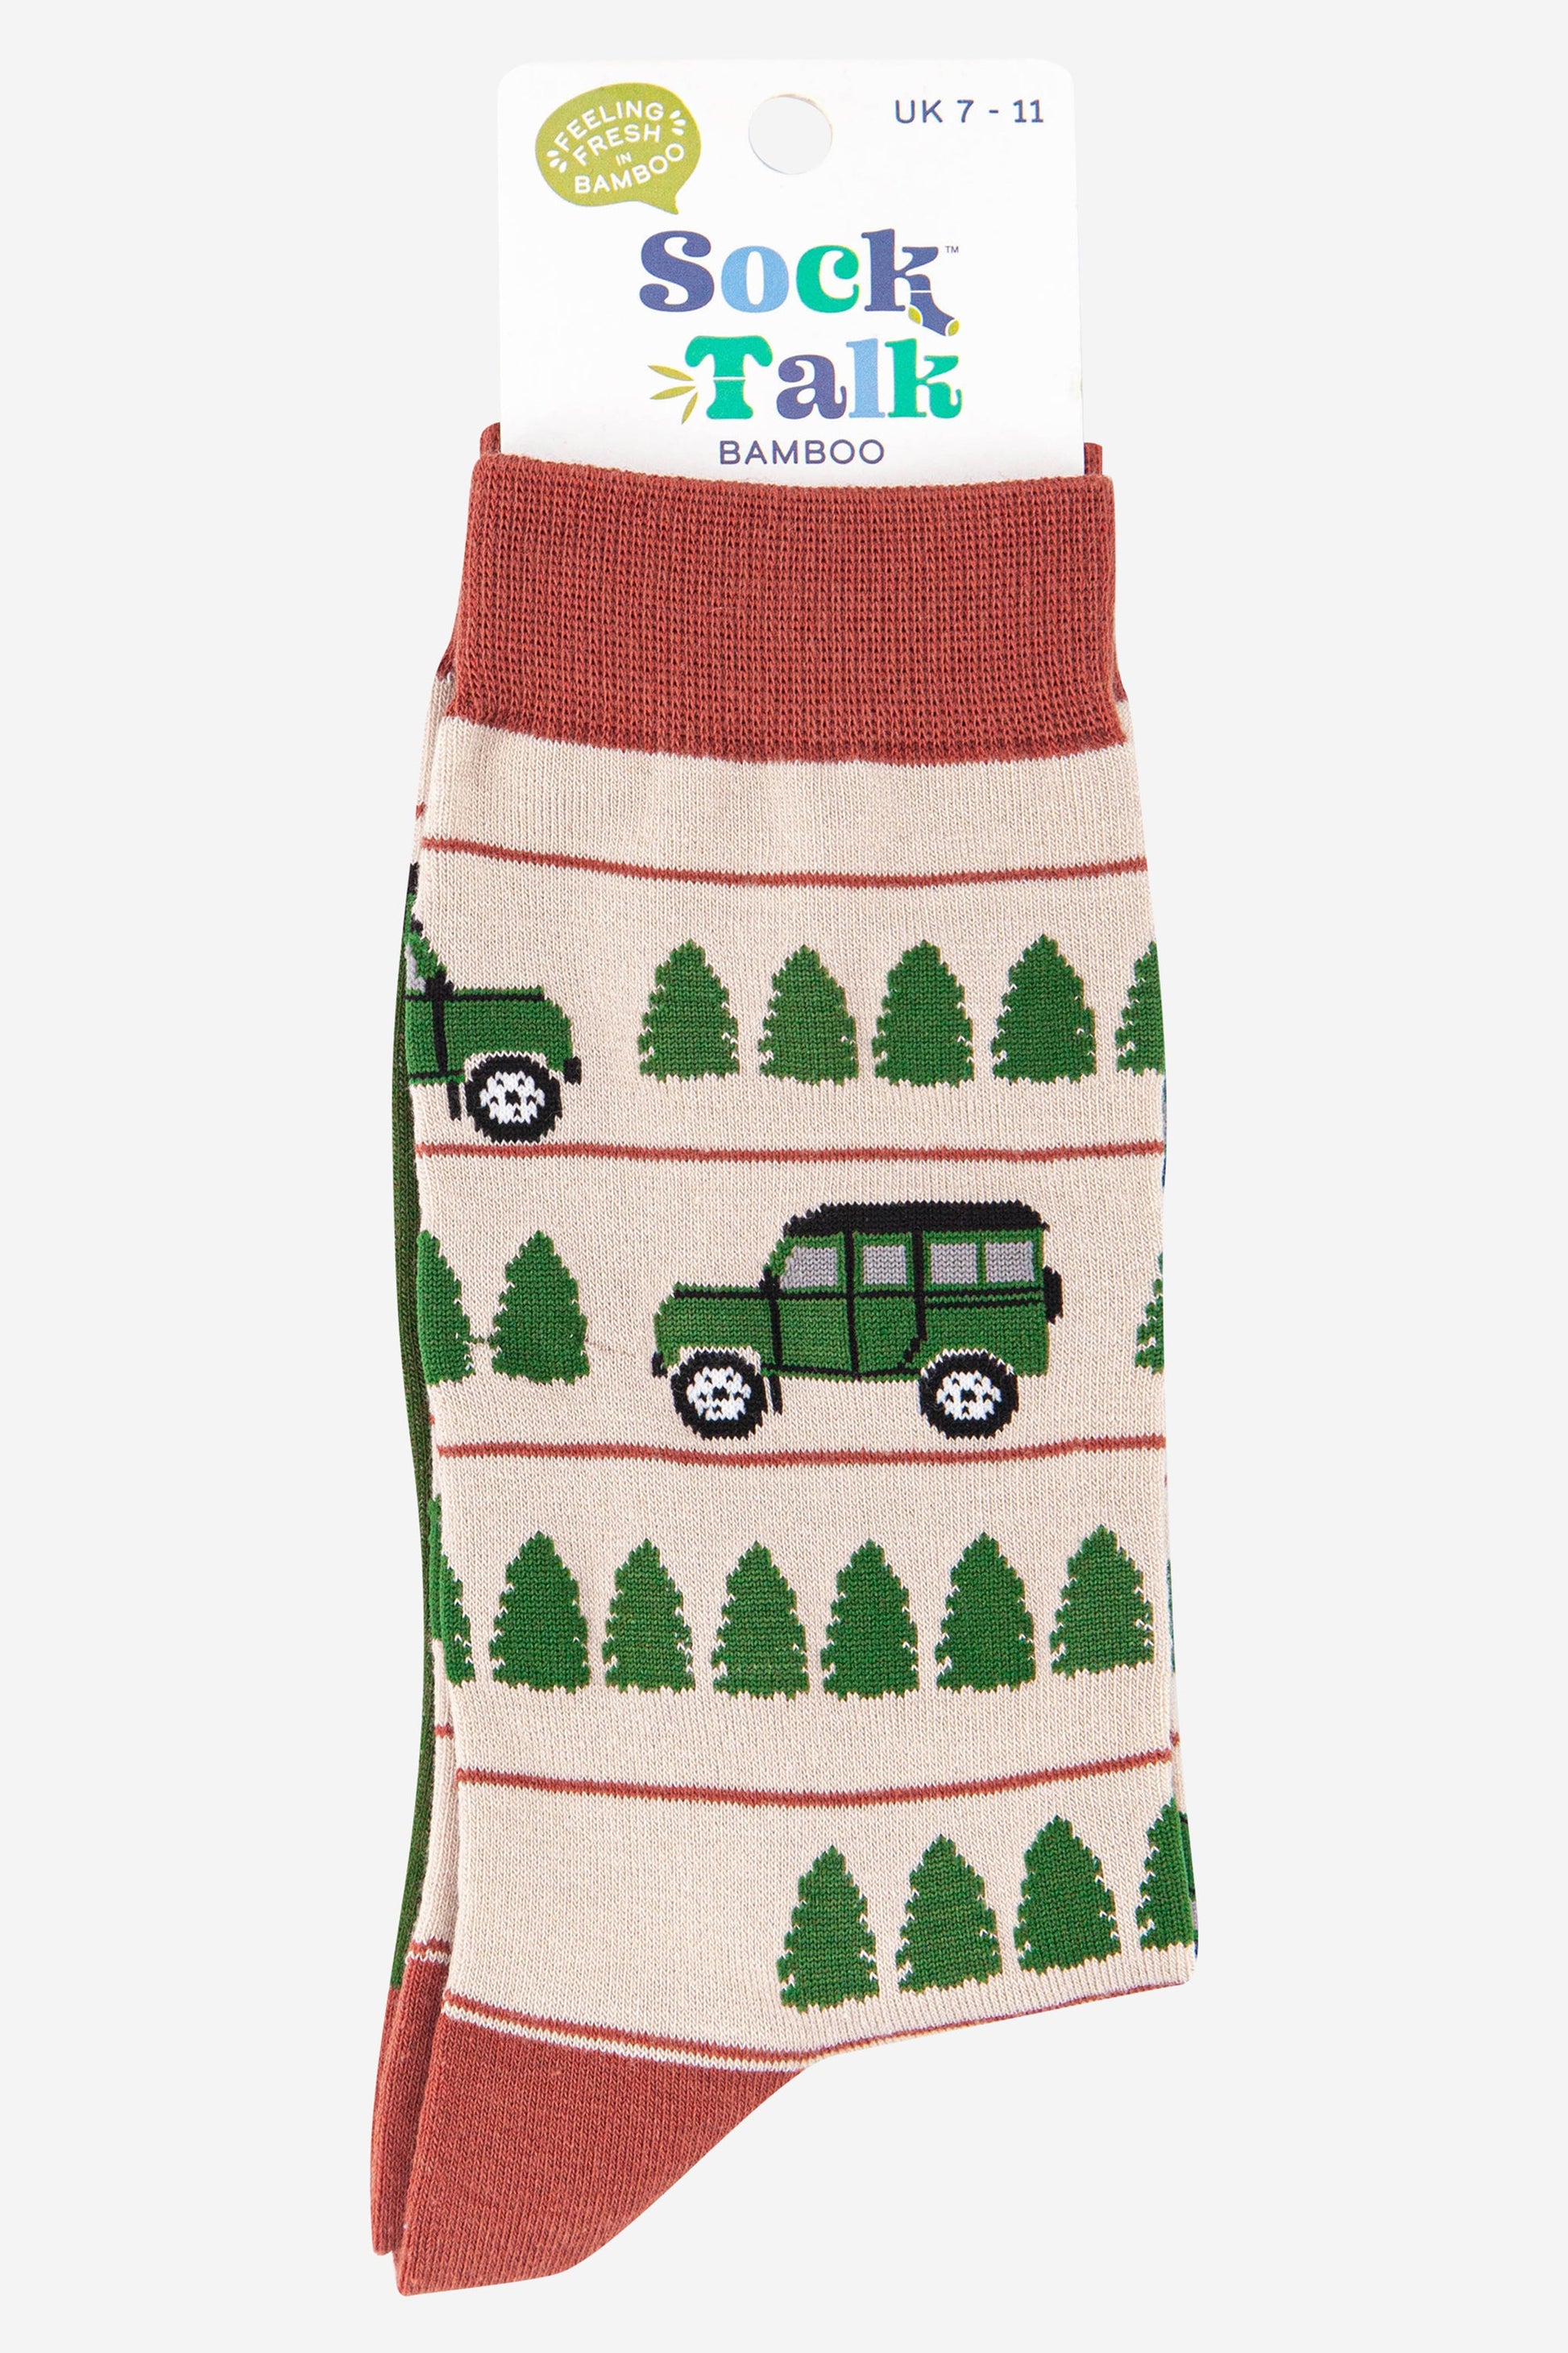 mens cream and green vehicle pattern socks with trees uk size 7-11